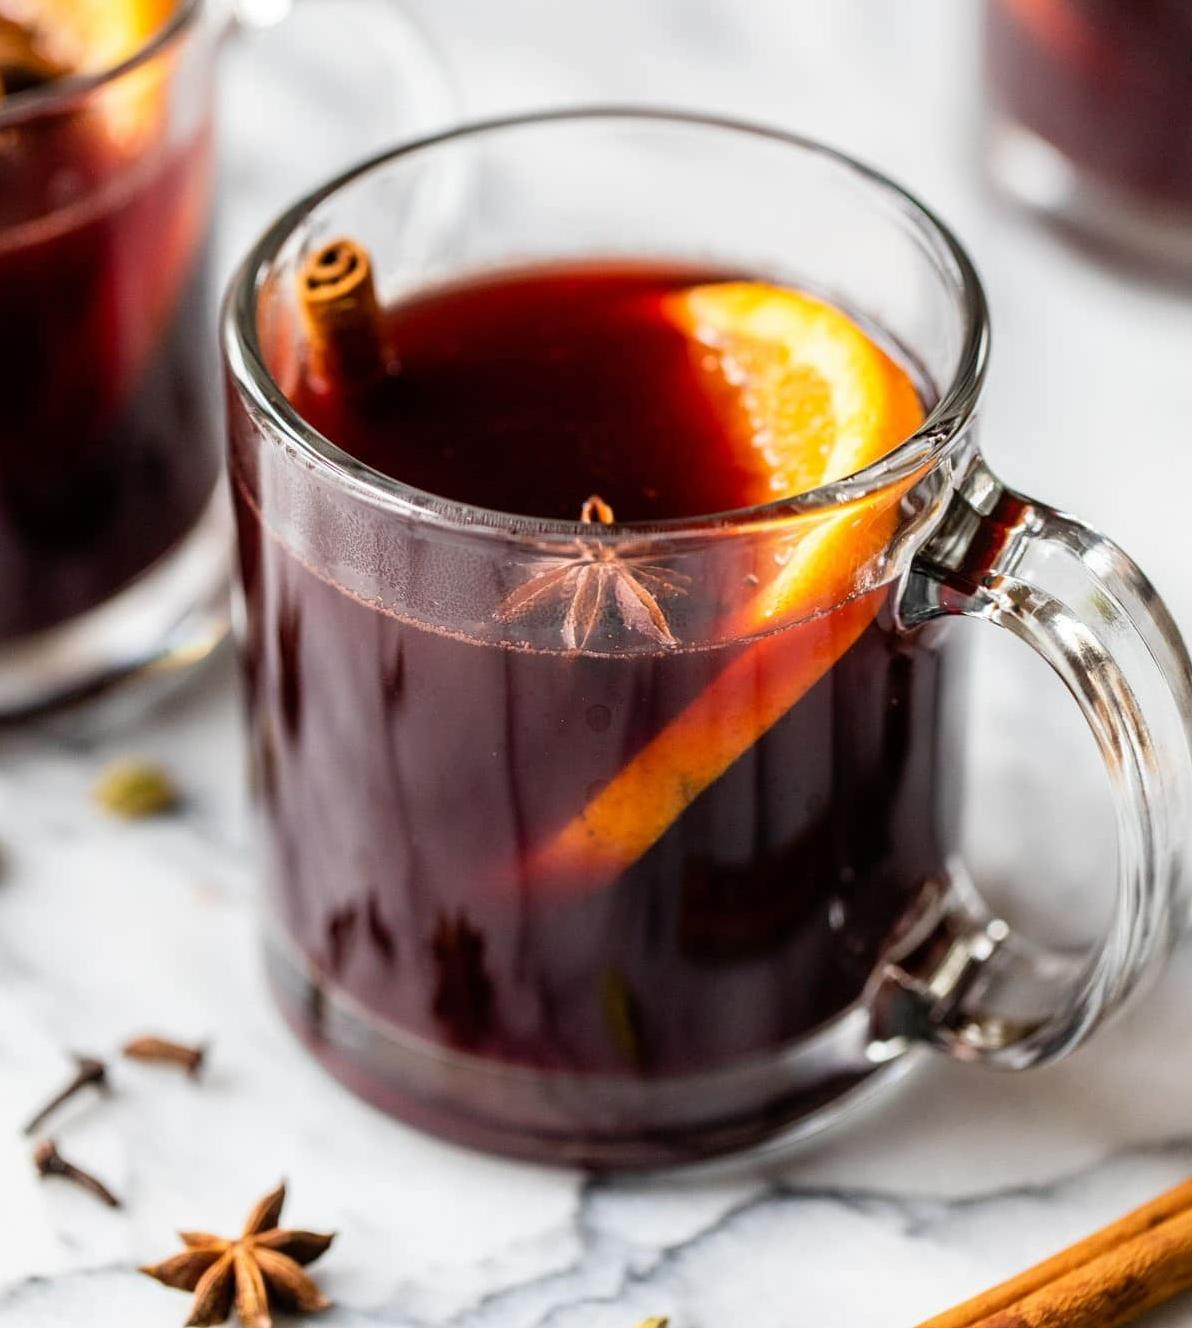  Bold, flavorful, and the perfect winter drink.